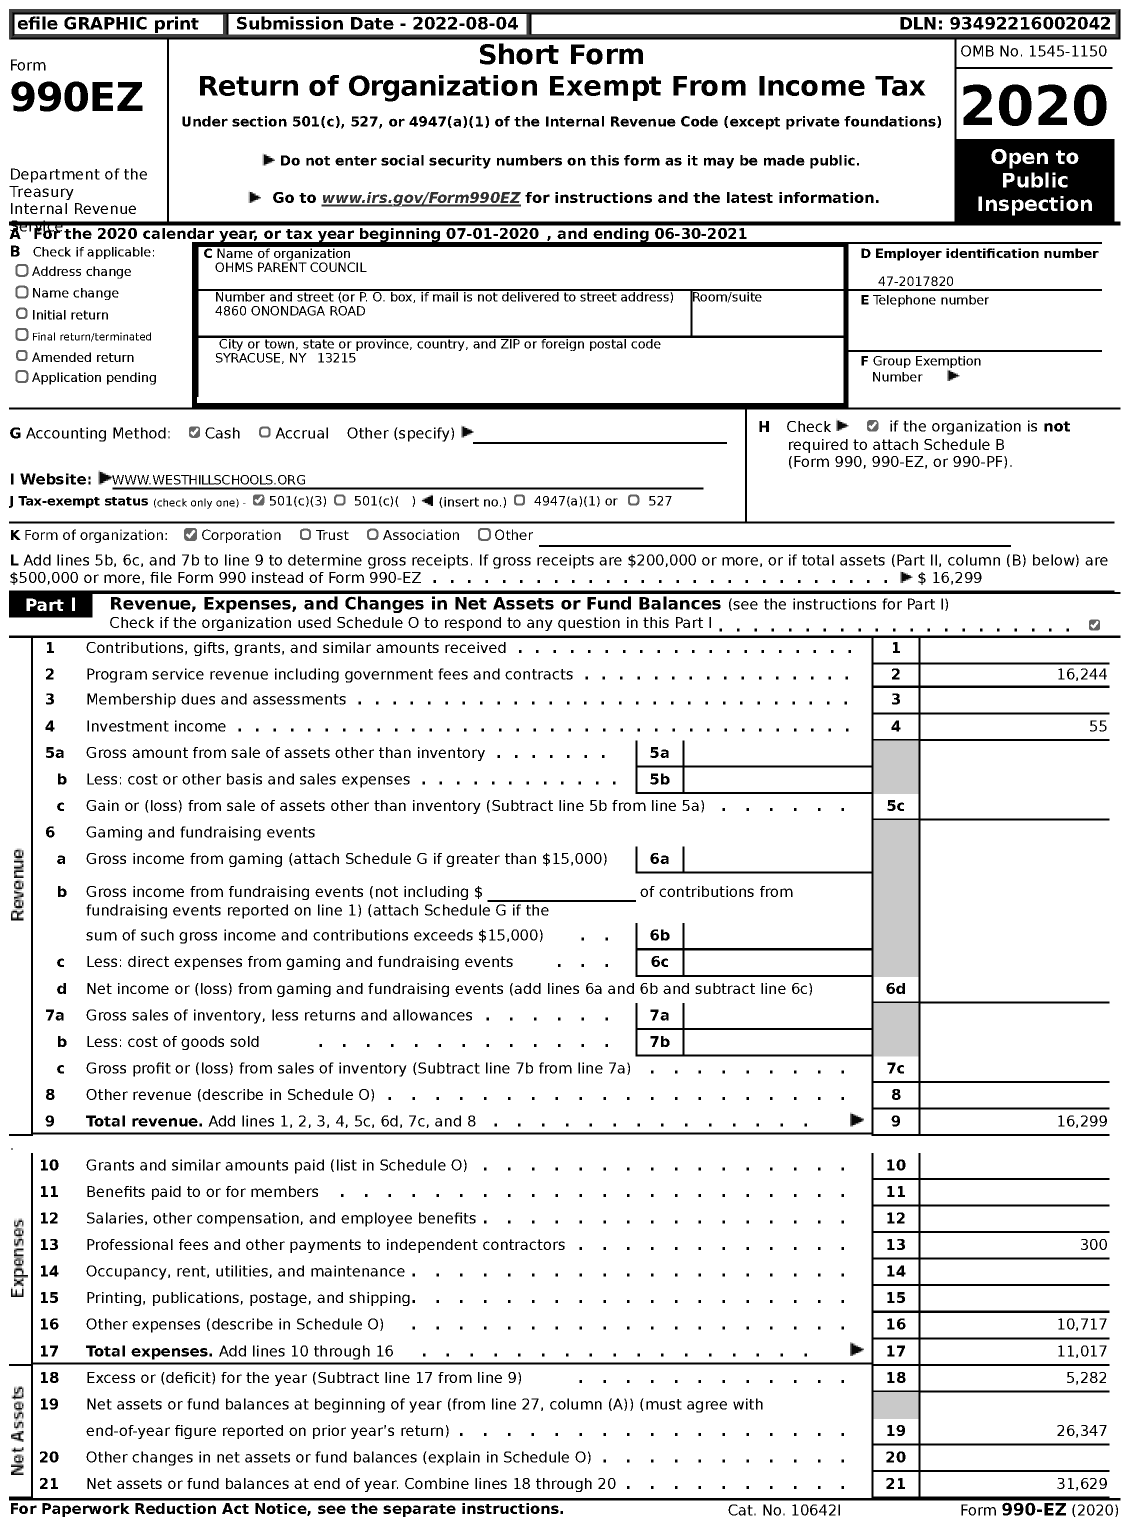 Image of first page of 2020 Form 990EZ for Ohms Parent Council